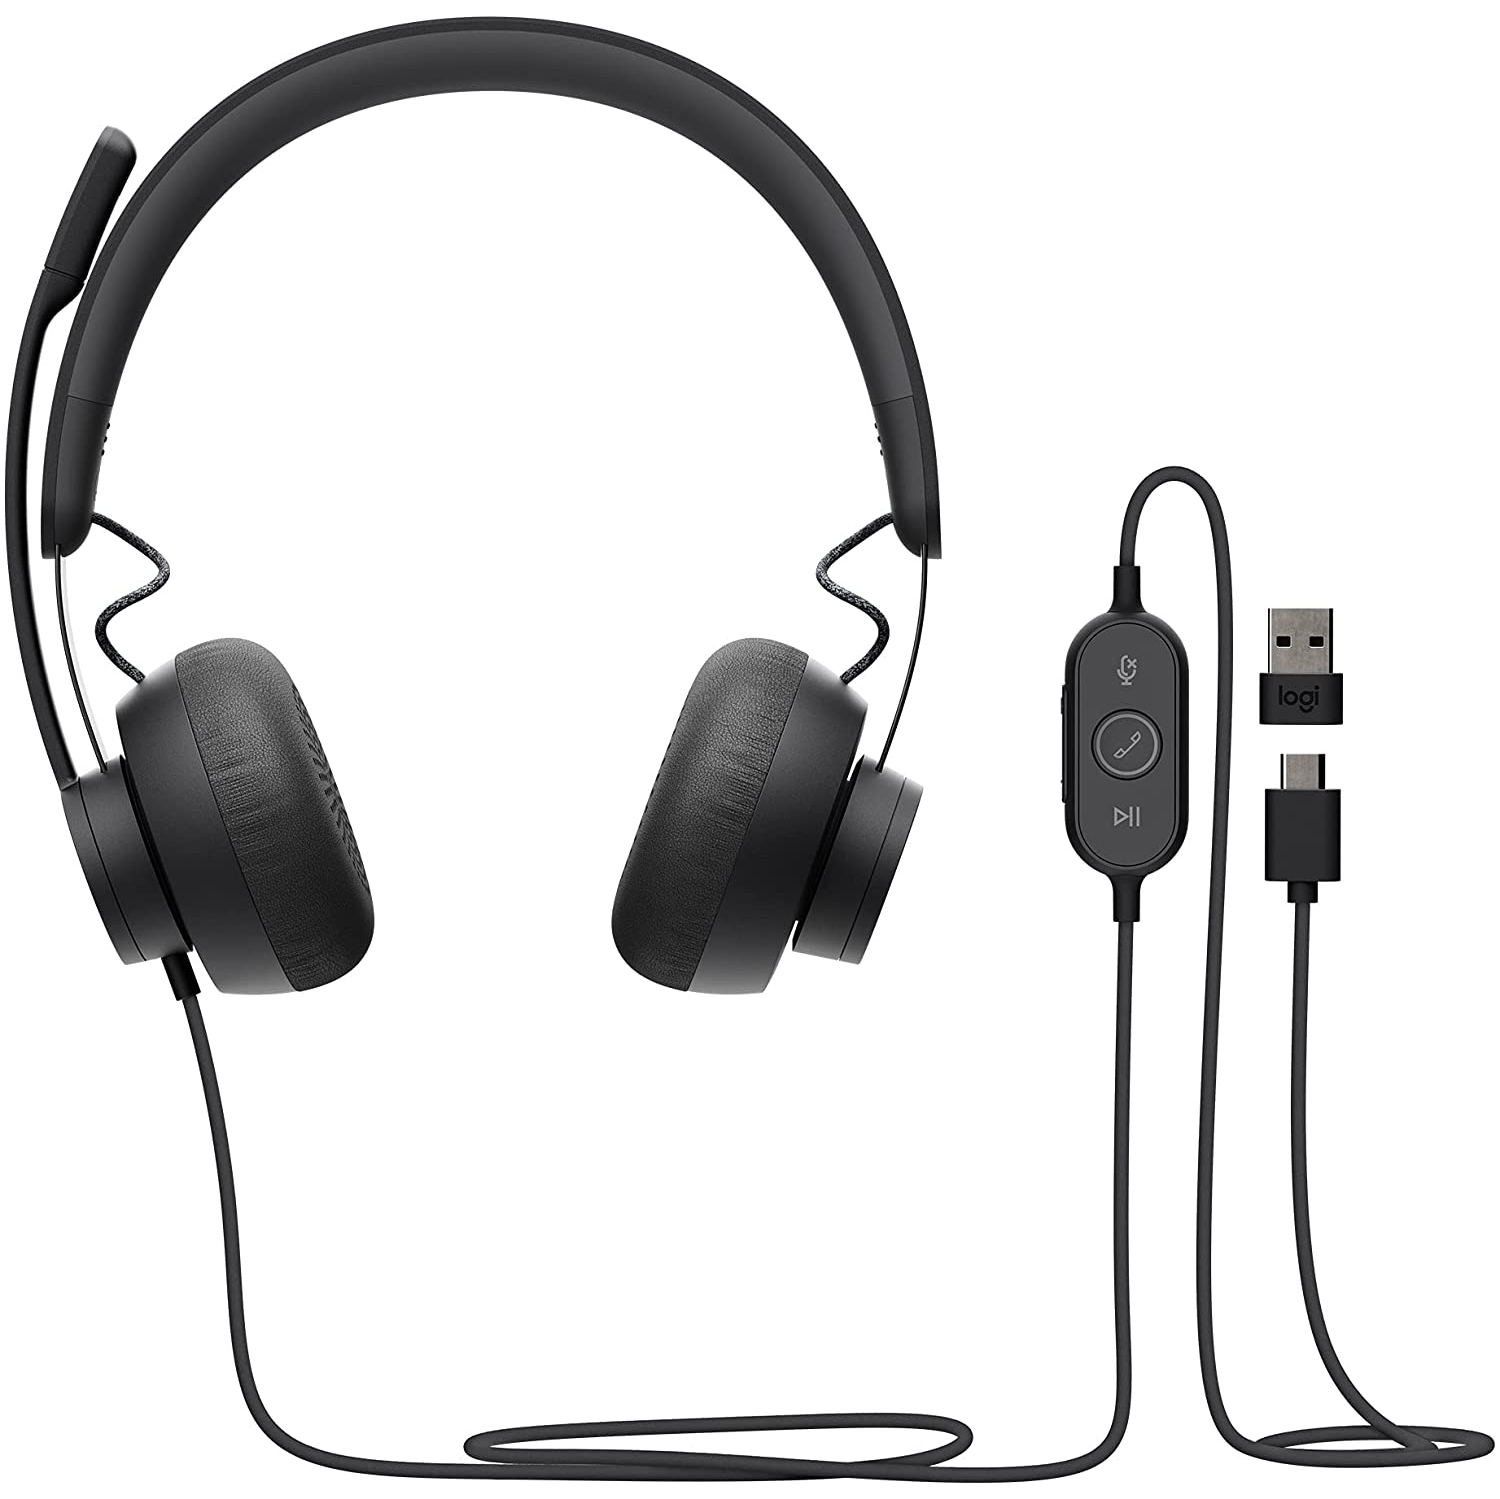 Logitech Zone Over-Ear Noise Cancelling Sound Isolating Headphones with Mic (981-000871) - Black